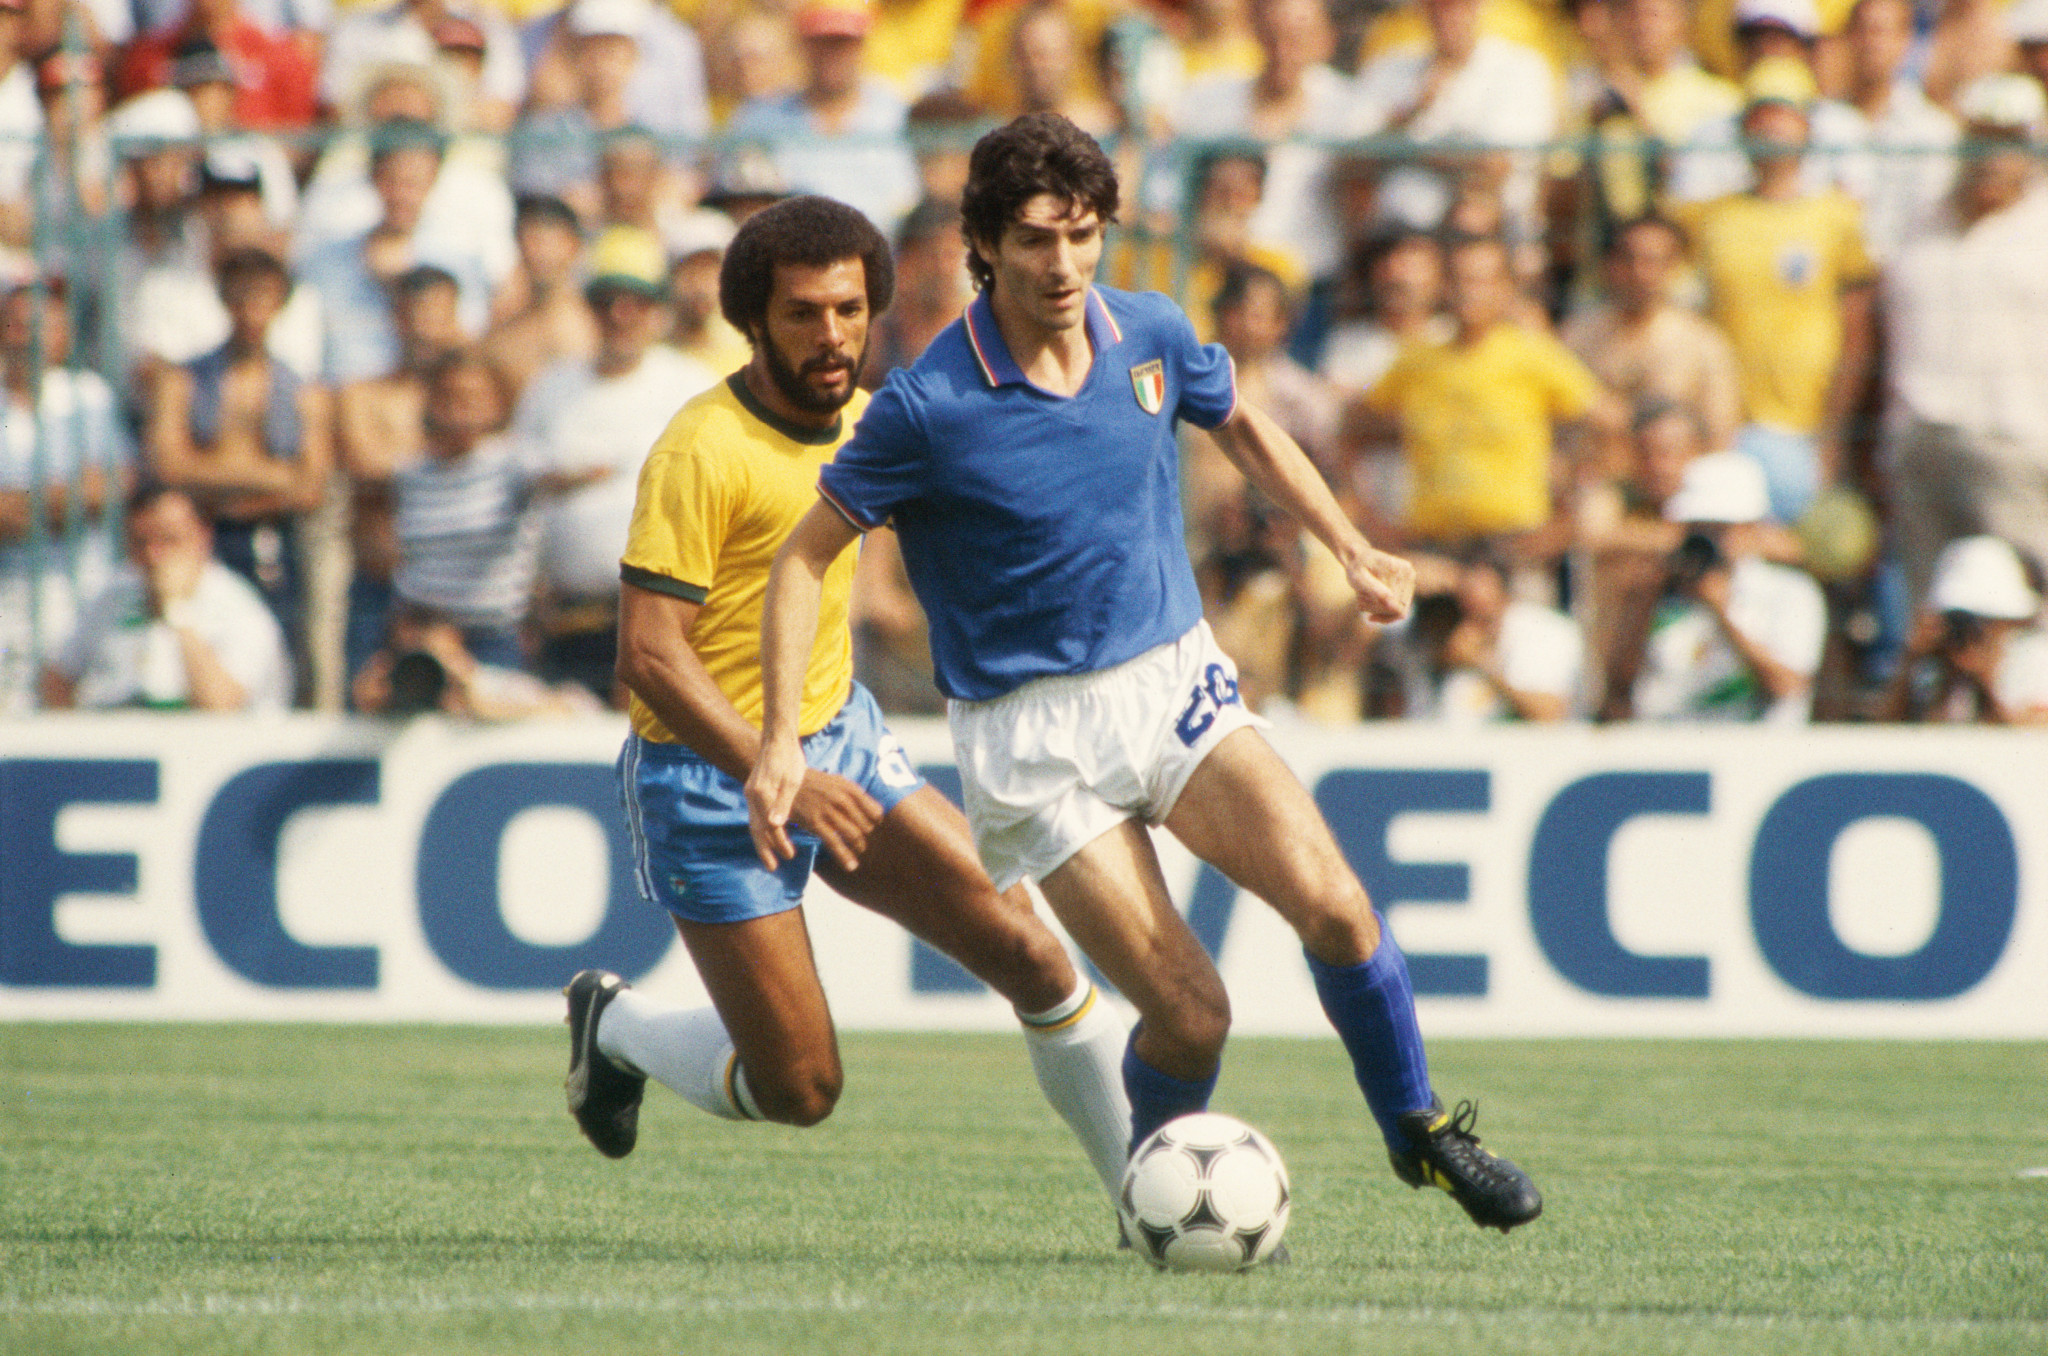 Paolo Rossi won the Golden Boot and Golden Ball when Italy triumphed at the 1982 World Cup ©Getty Images